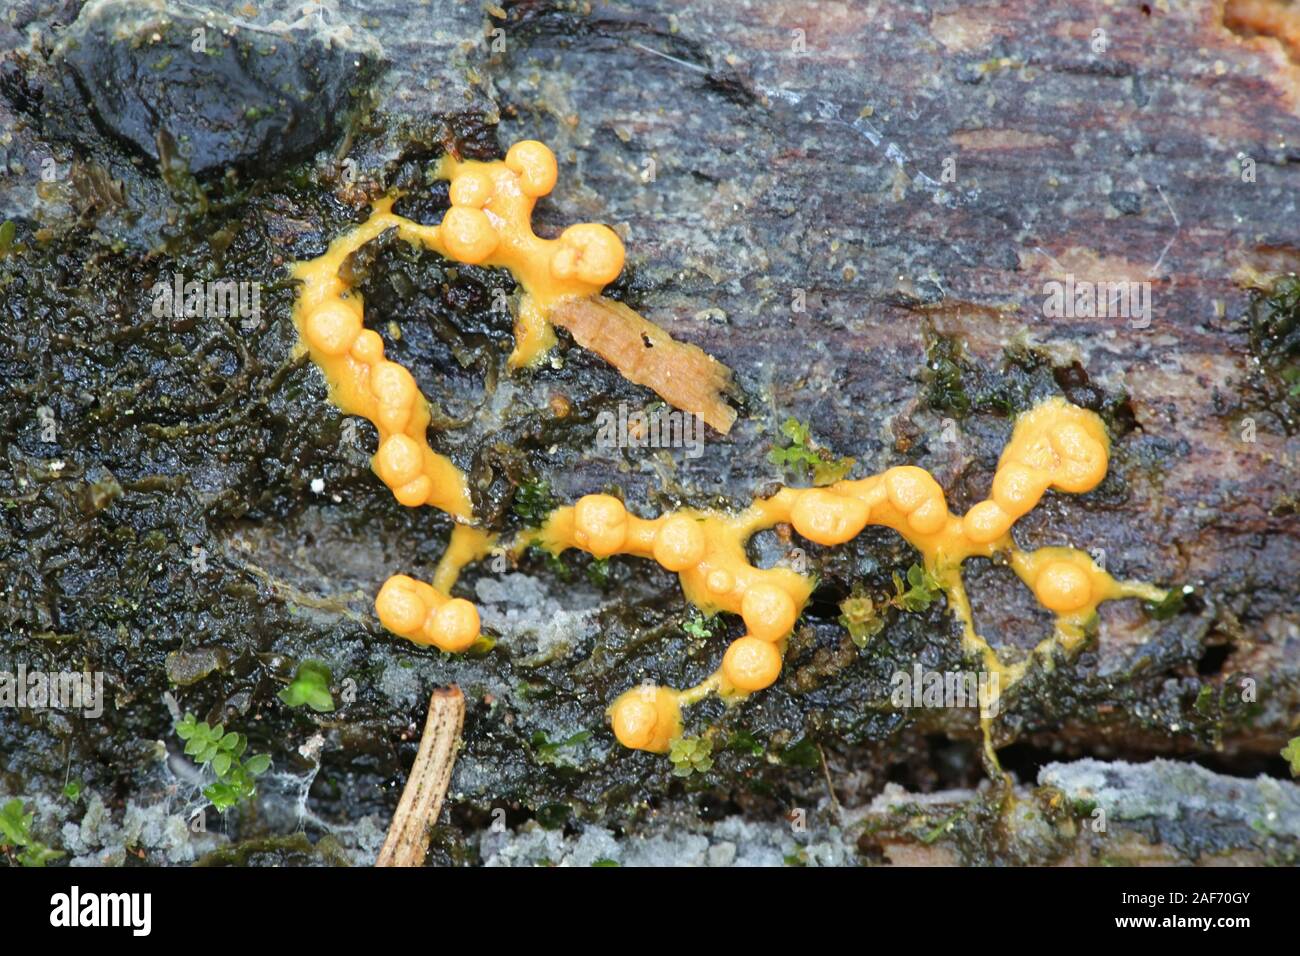 Lepidoderma tigrinum, known as spotted tiger slime mold, beginning to develop sporangia Stock Photo